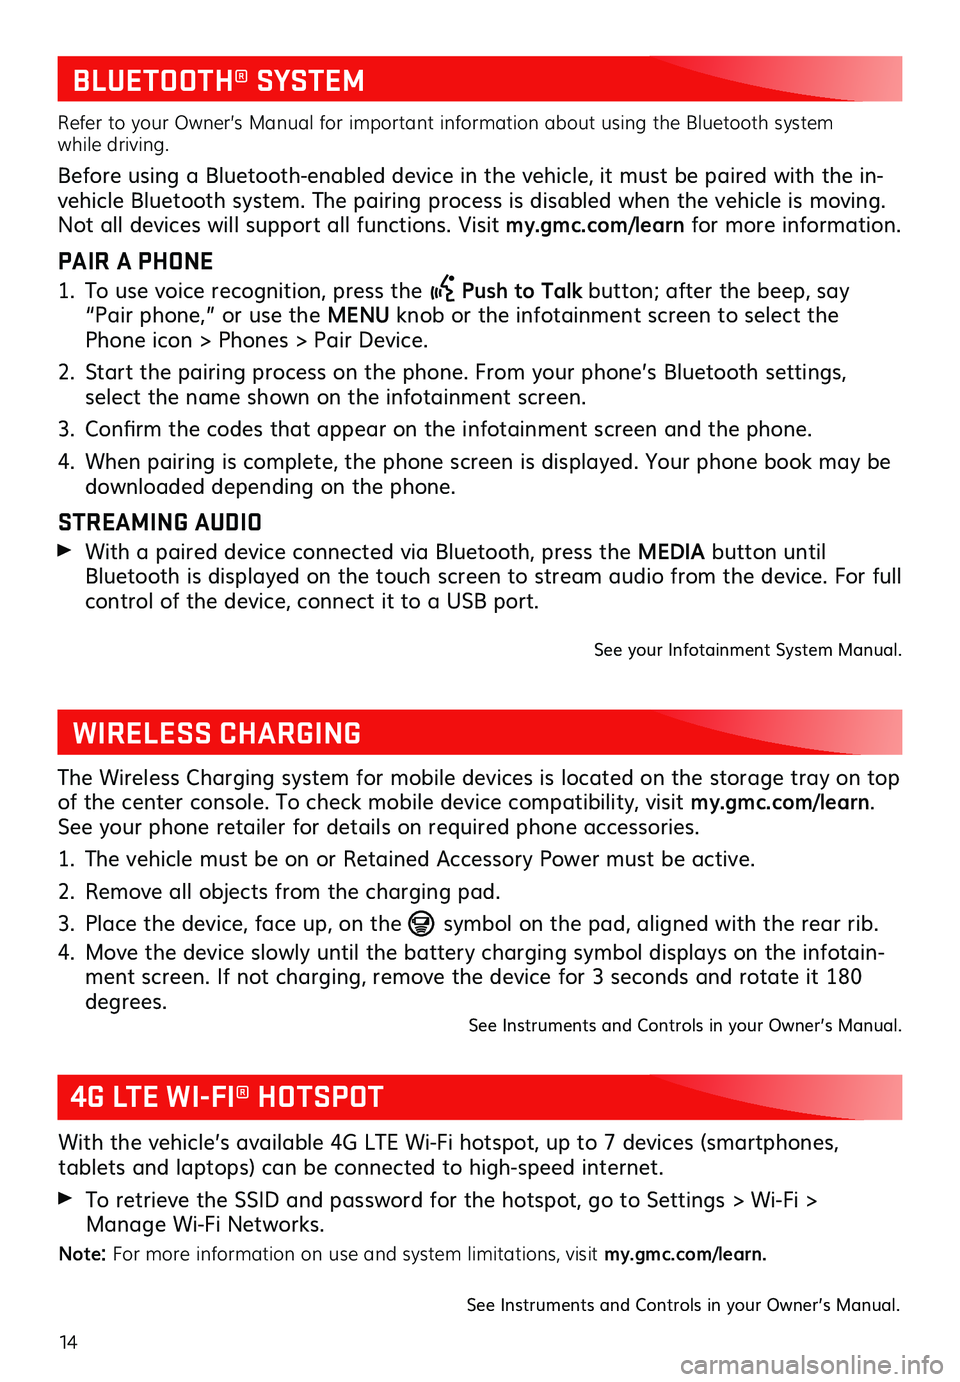 GMC YUKON 2019  Get To Know Guide 14
BLUETOOTH® SYSTEM
Refer to your Owner’s Manual for important information about using the Bluetooth system while driving. 
Before using a Bluetooth-enabled device in the vehicle, it must be paire